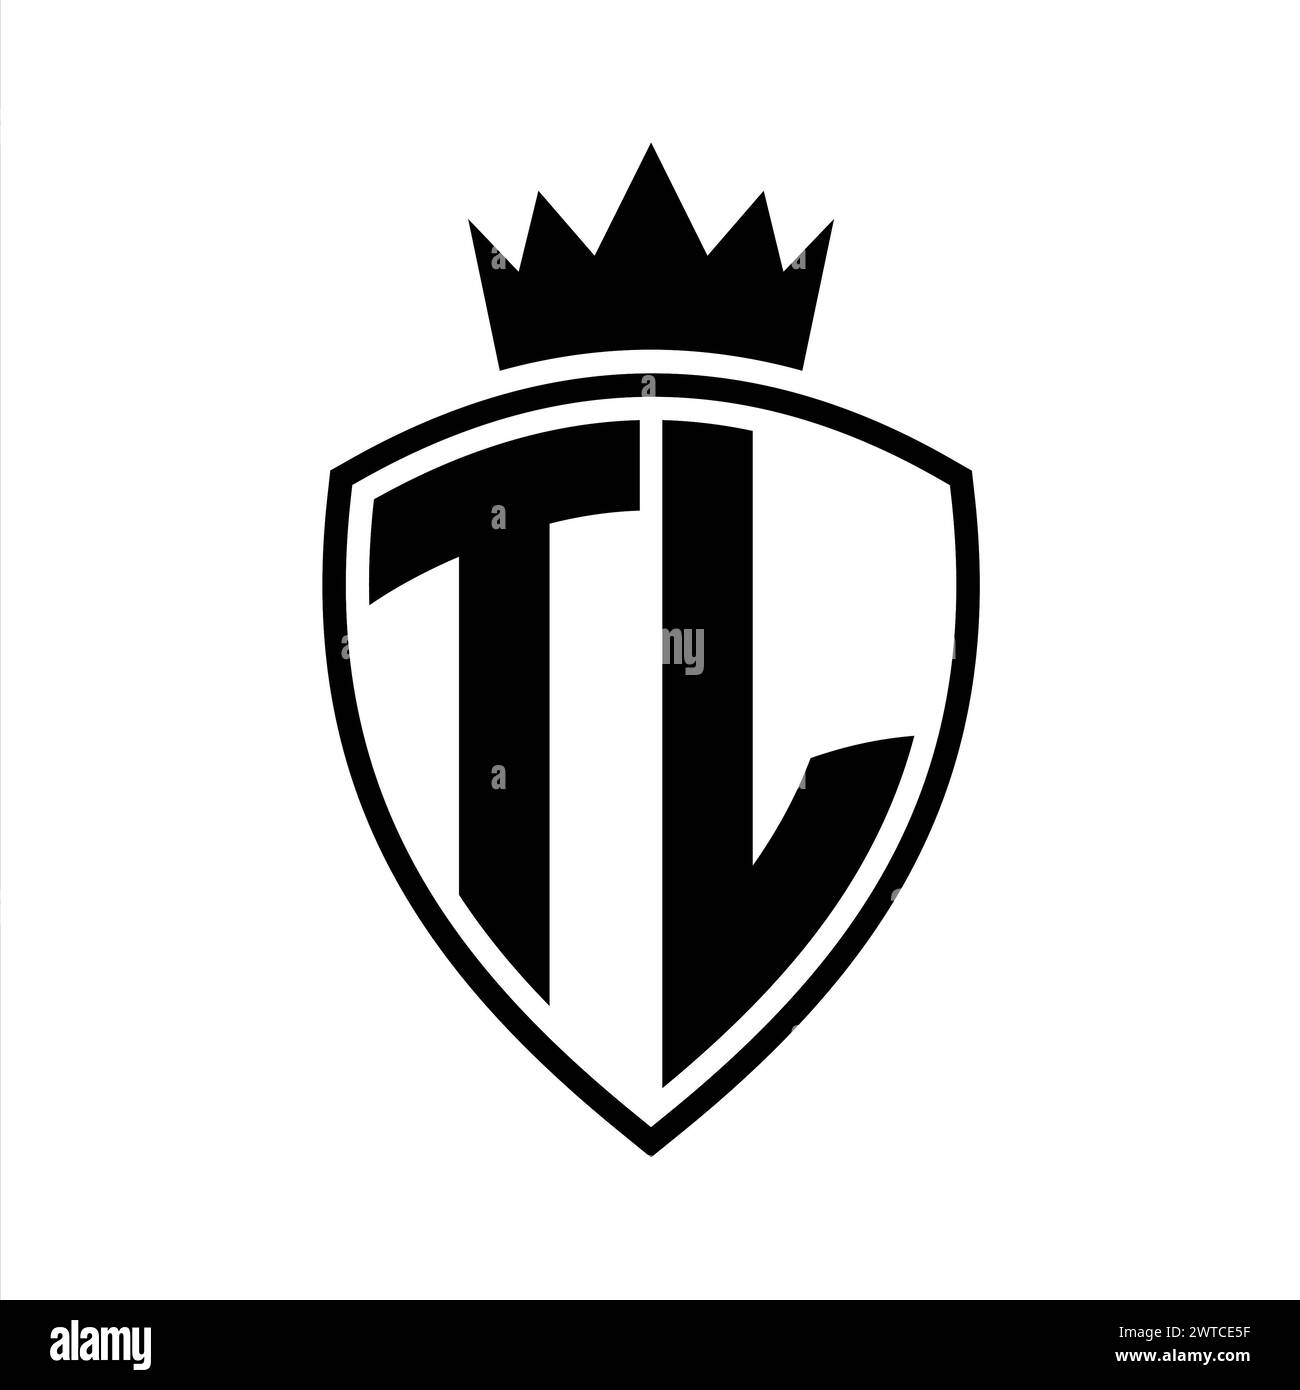 TL Letter bold monogram with shield and crown outline shape with black and white color design template Stock Photo